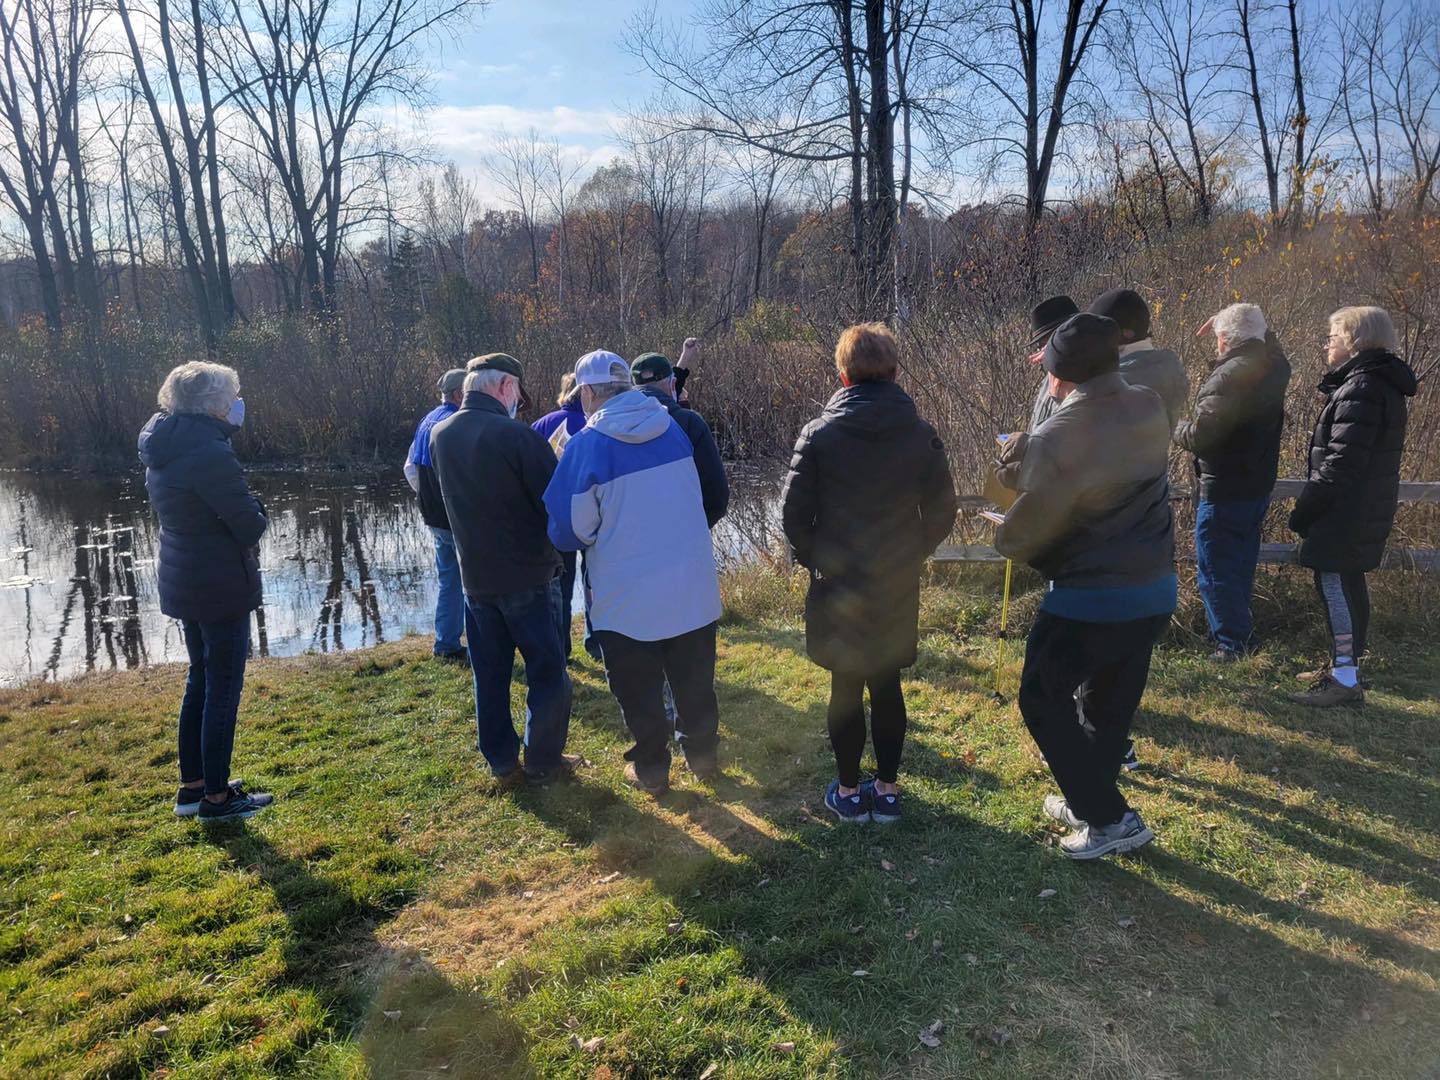 small group of older adults looking at farm pond in the fall